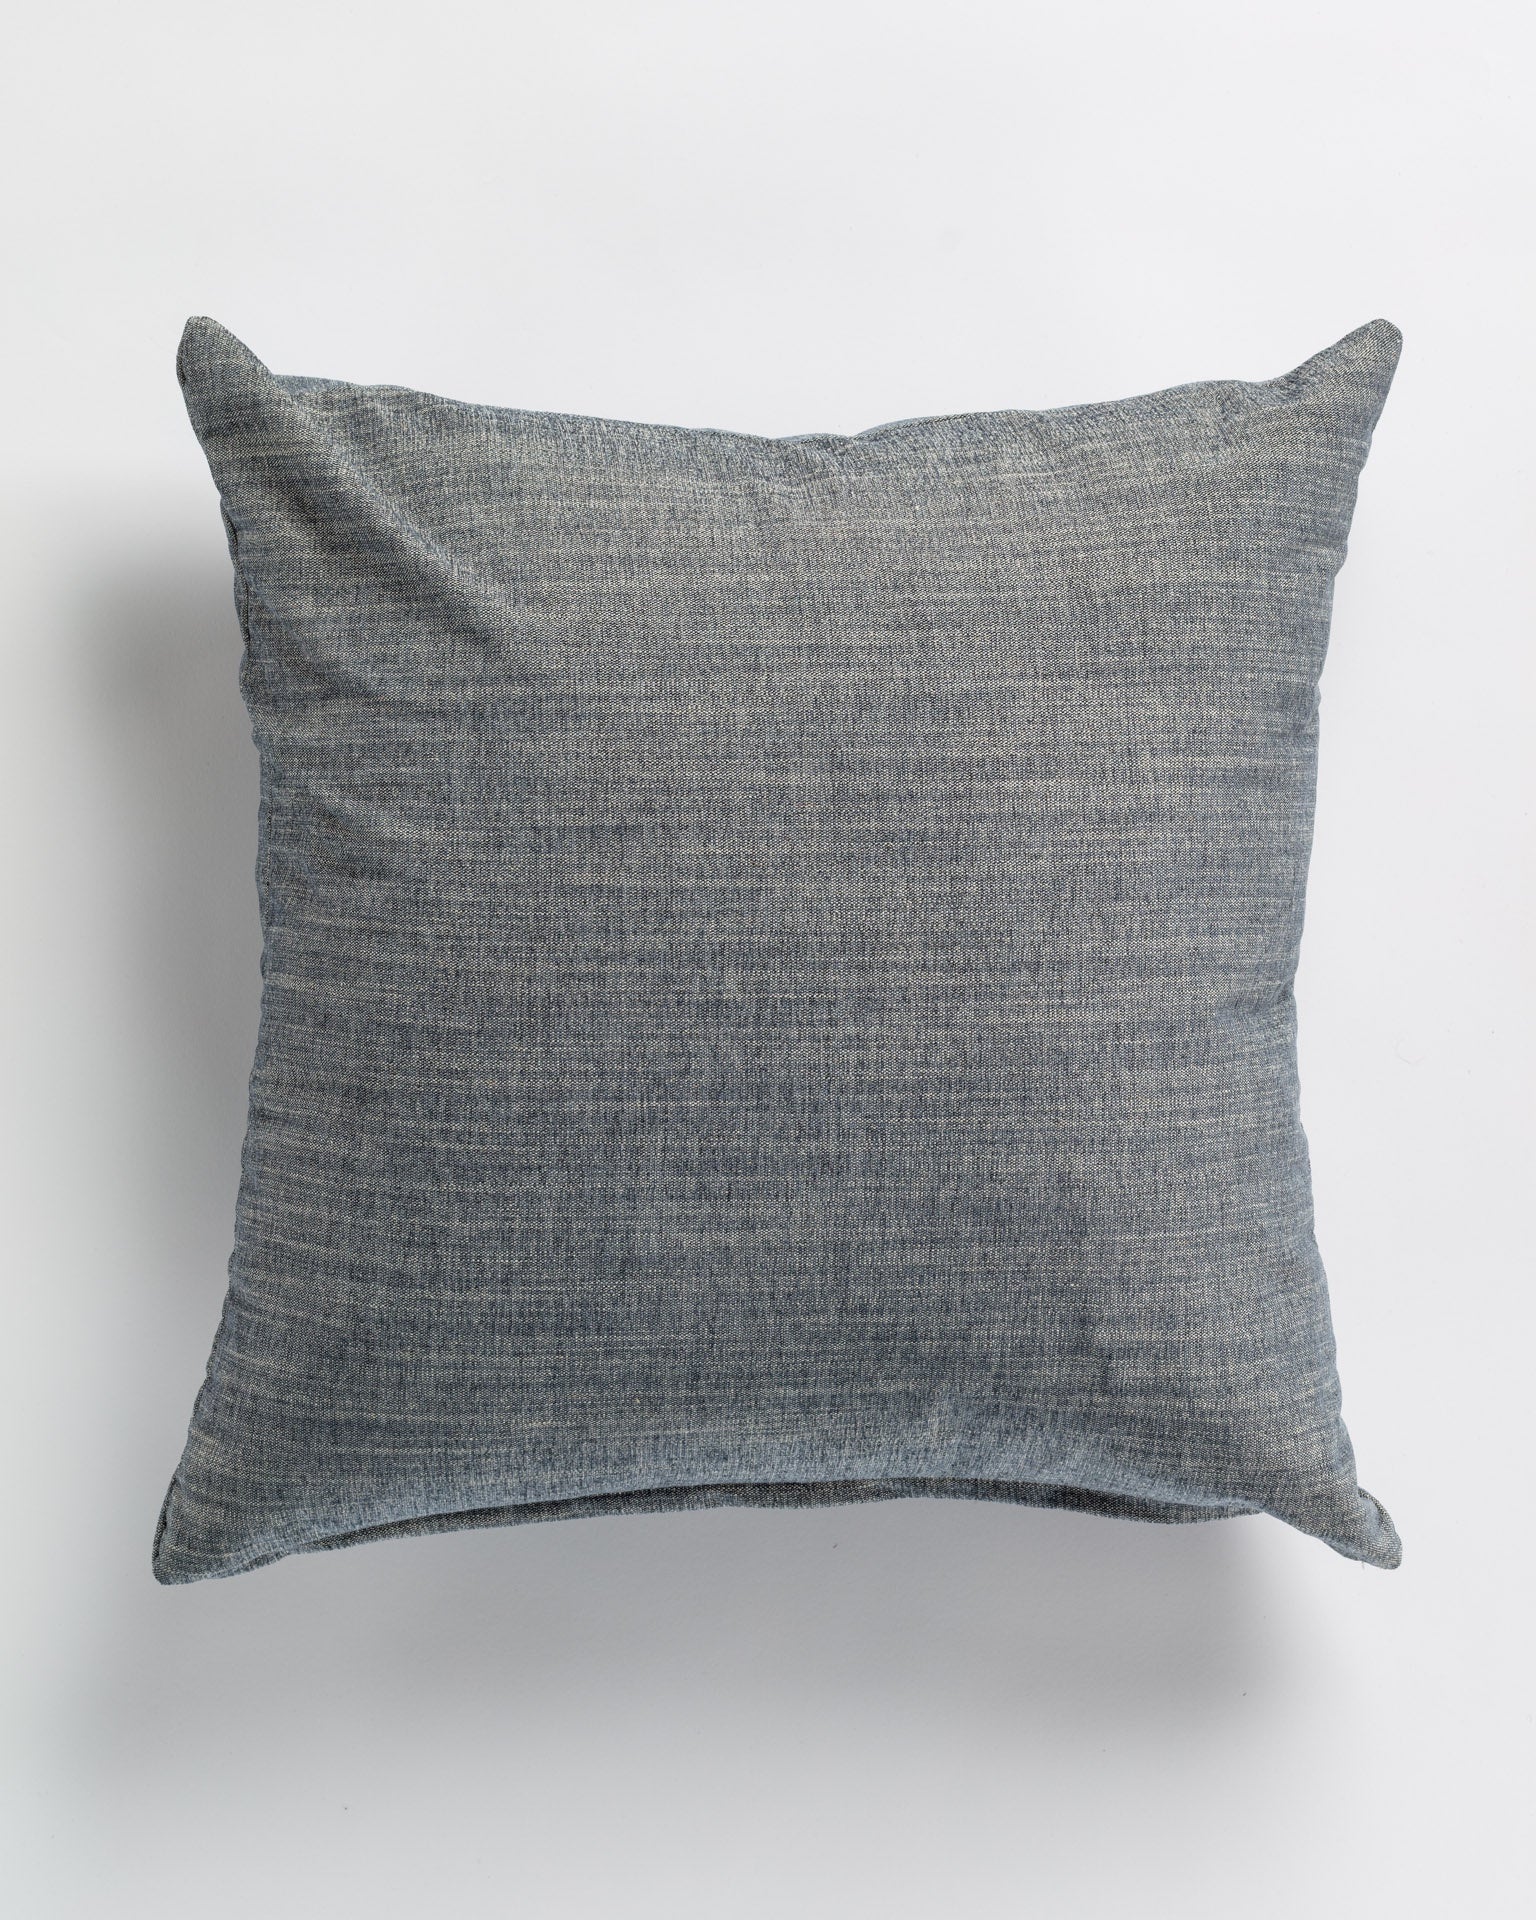 A Carter Nordic Pillow 26x26" from Gabby, with a fine texture, displayed against a plain white background in a Scottsdale Arizona bungalow. The pillow is plump and square-shaped, featuring visible stitching along the edges.